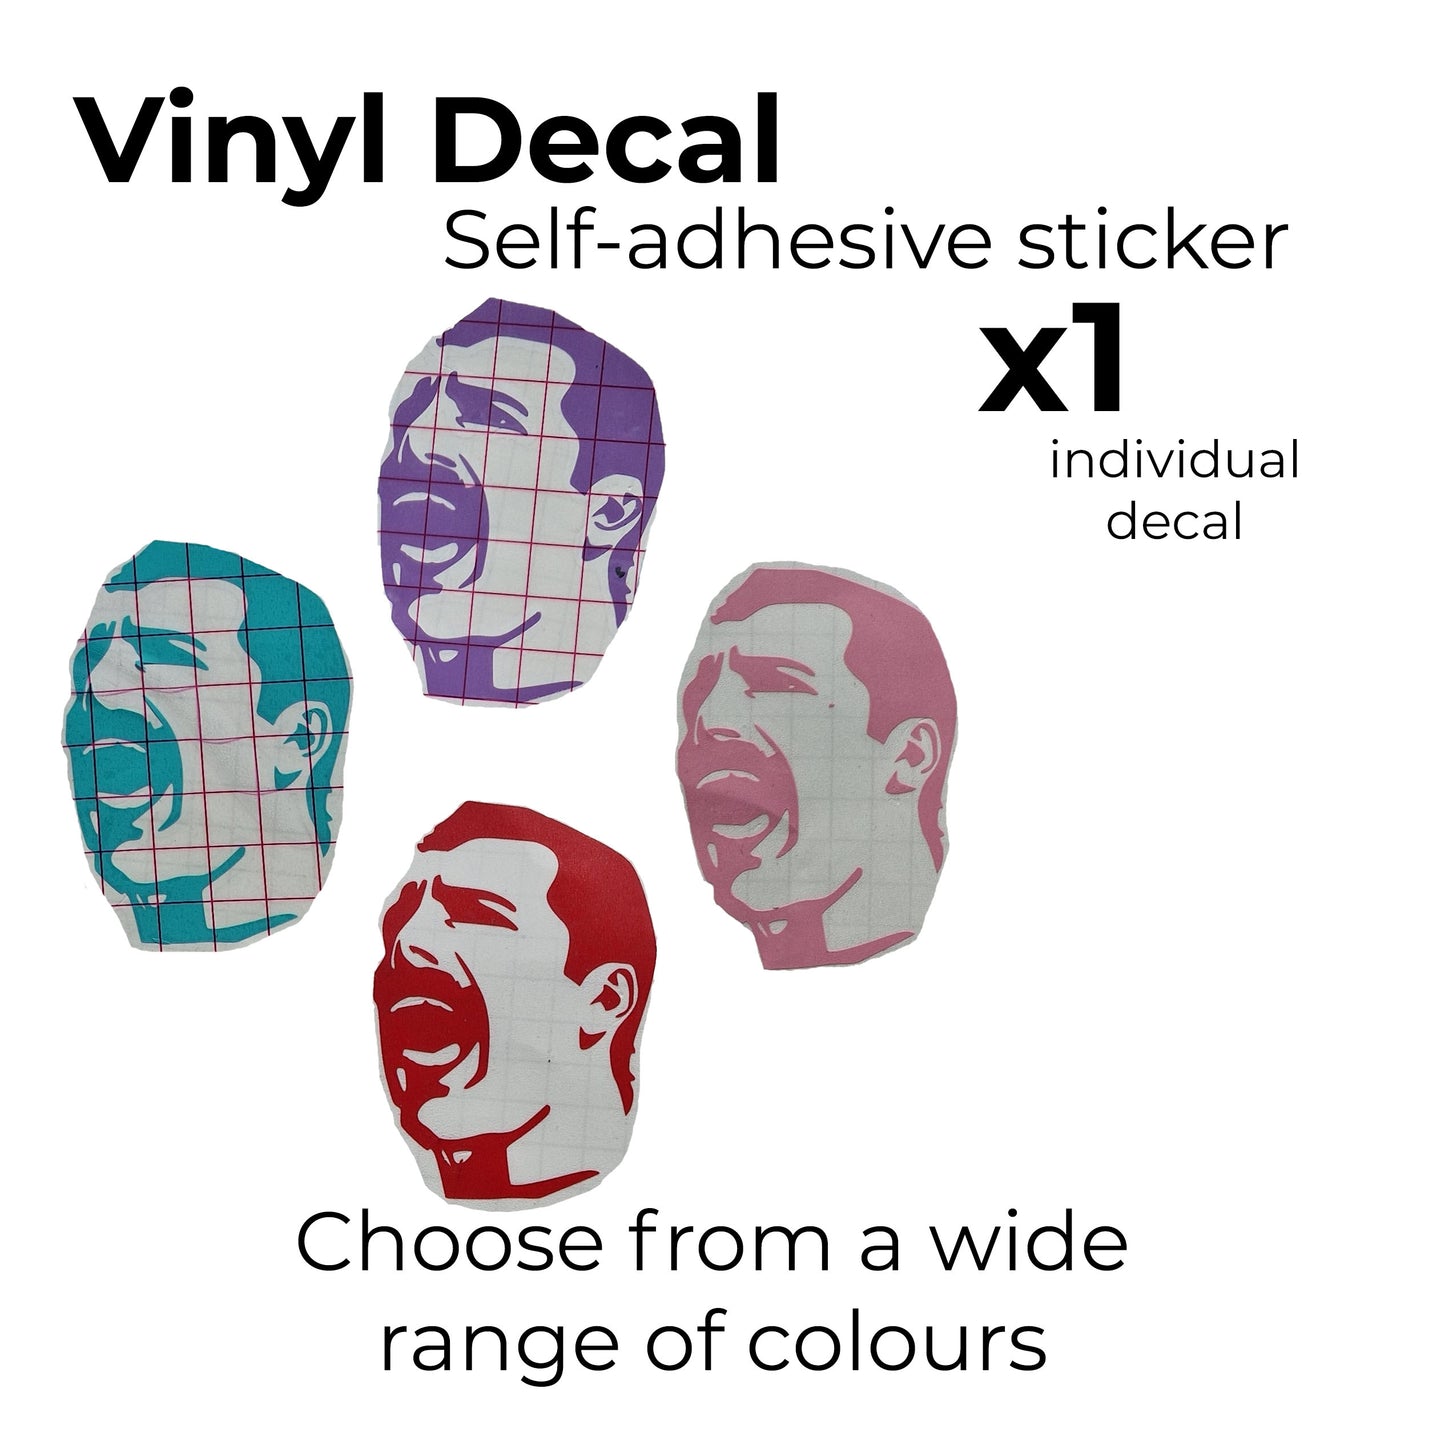 freddie mercury vinyl stickers laid out like bohemian rhapsody. qty 1x sticker. wide range of colours available